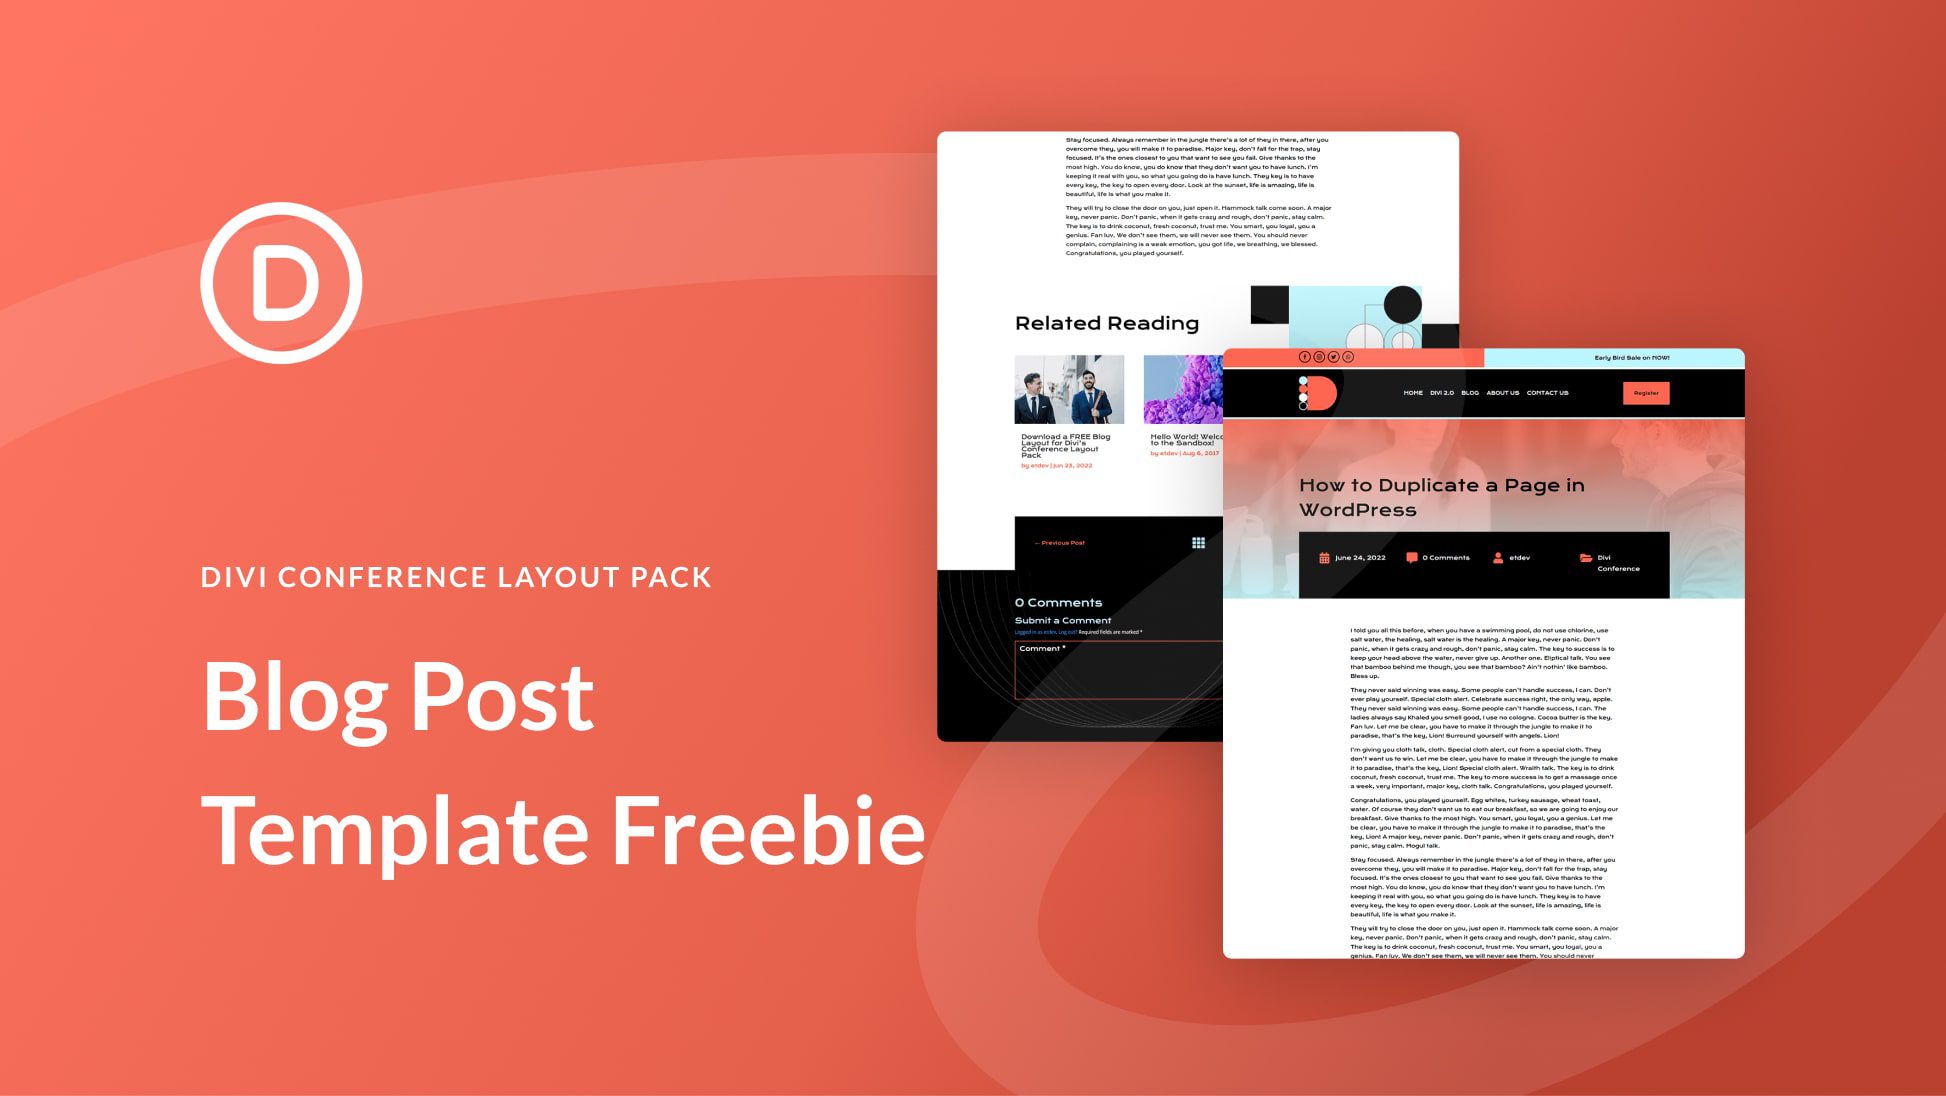 Download a FREE Blog Post Template for Divi’s Conference Layout Pack